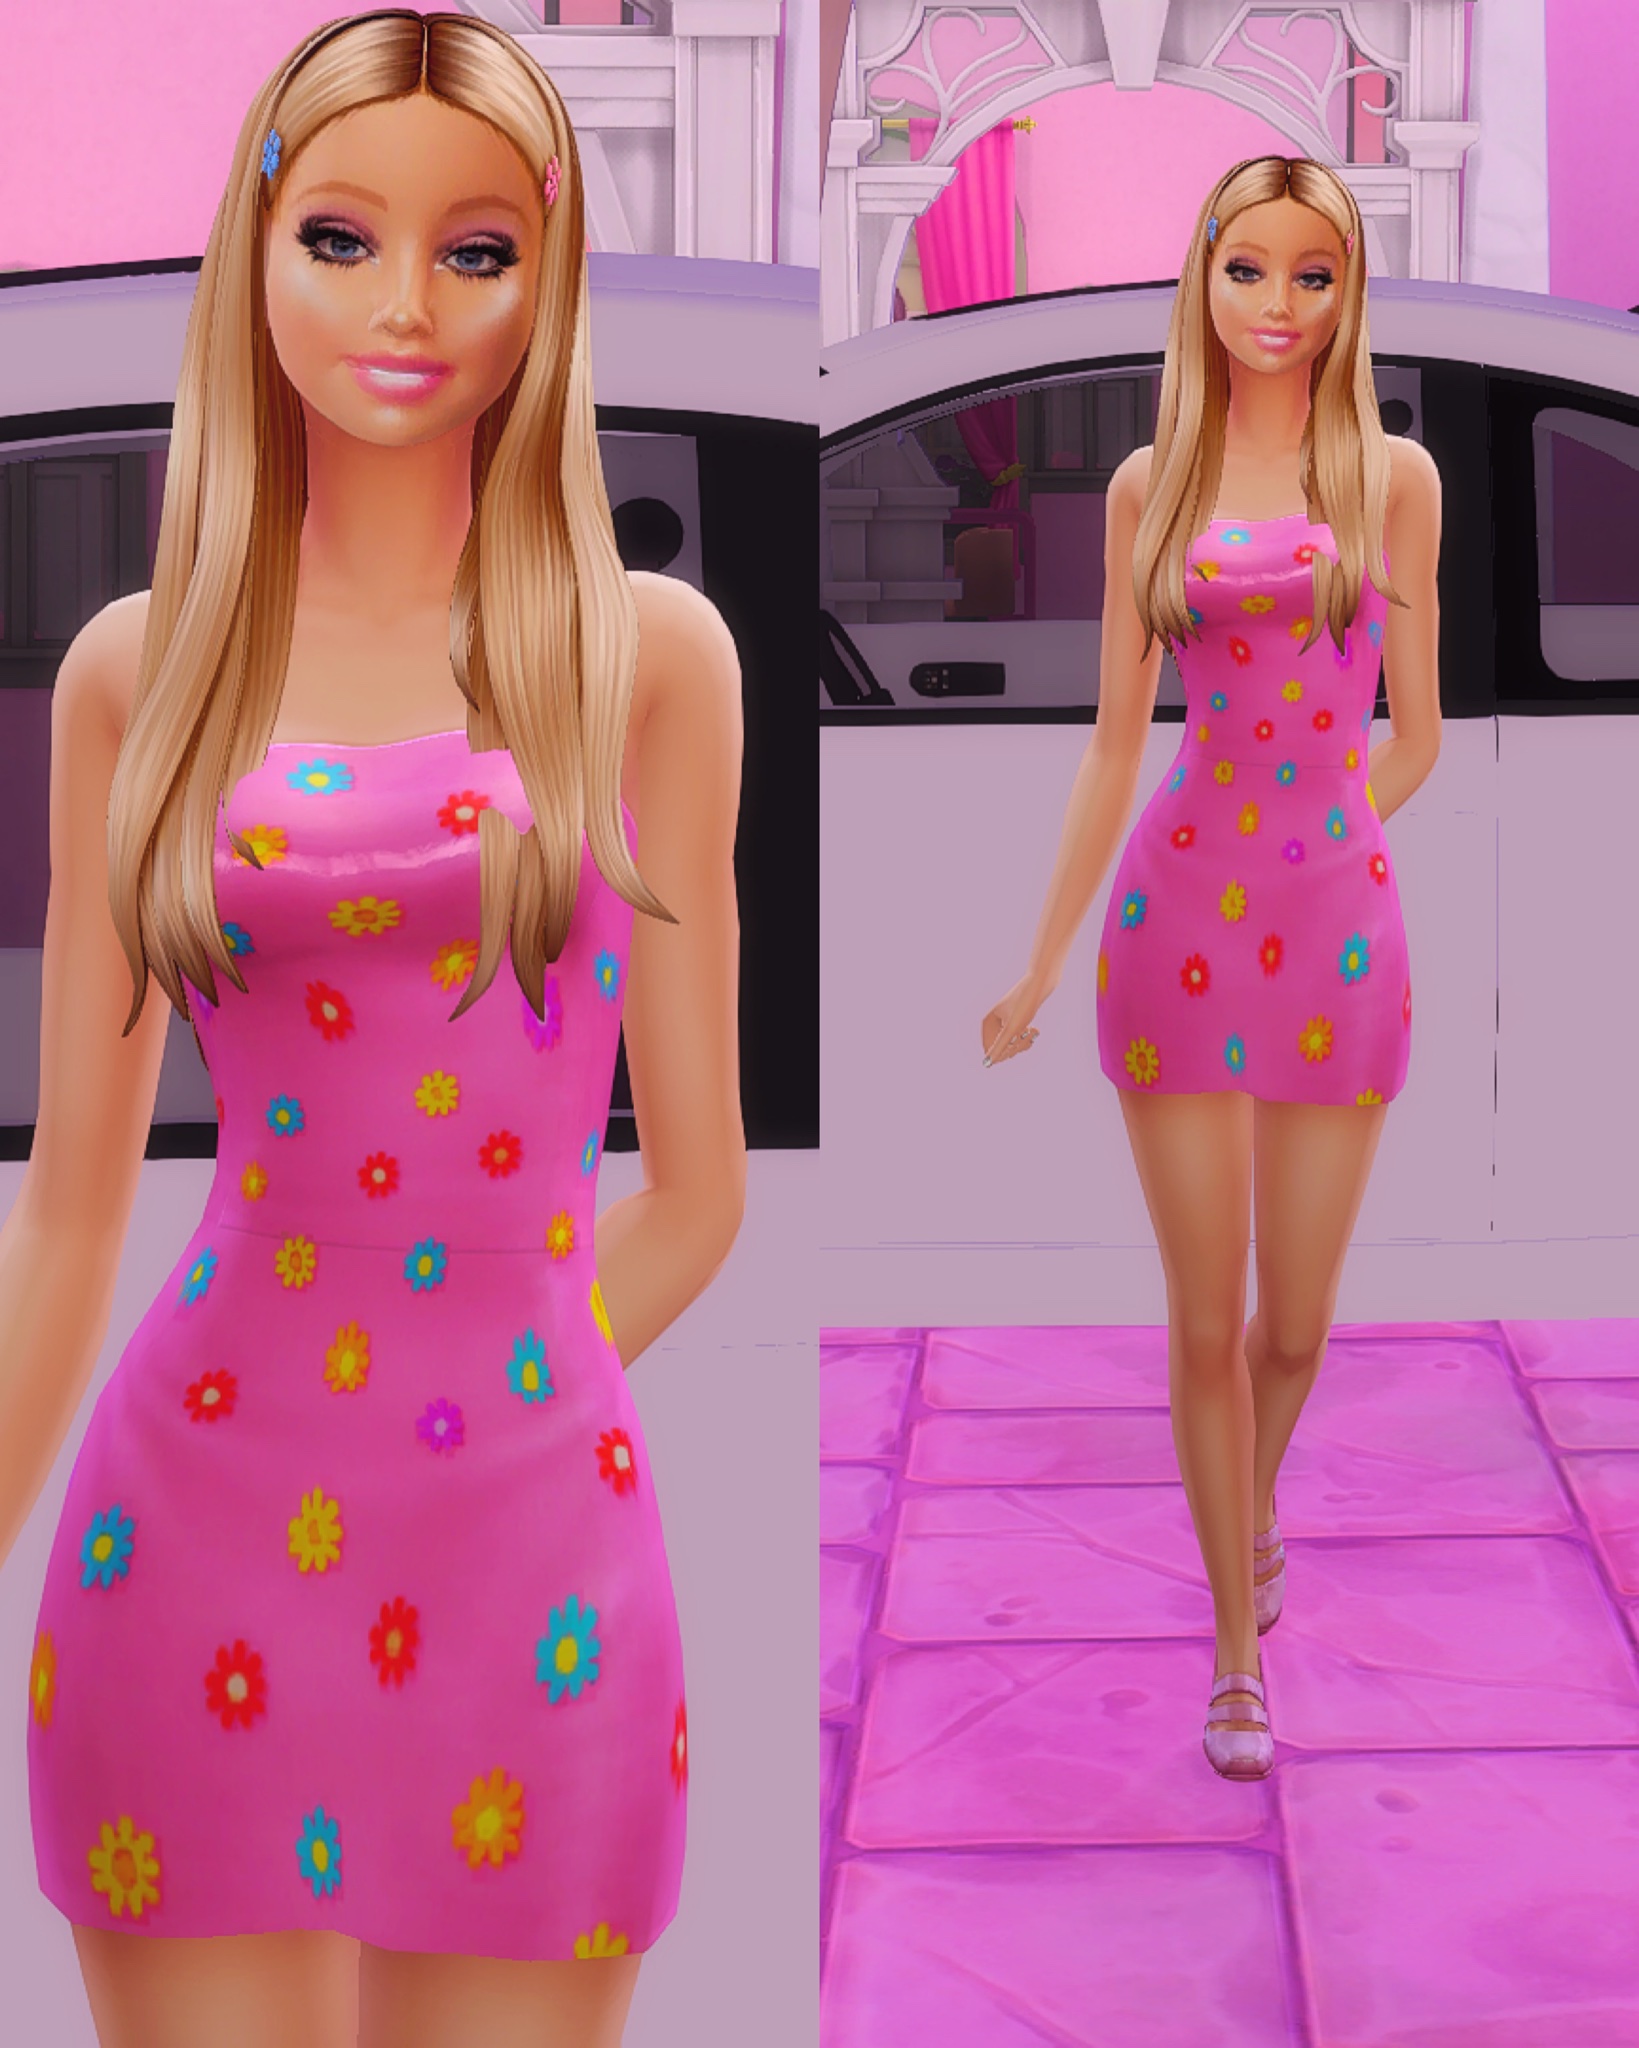 ParteeSims on Twitter: "I made Barbie in The sims! 💕 Inspired by @TheKateEmerald Barbie Dream House! #TS4 #TheSims4 @TheSims #Showusyoursims #Thesims #sims4 #Barbie https://t.co/yE9LZwsgIX" / Twitter